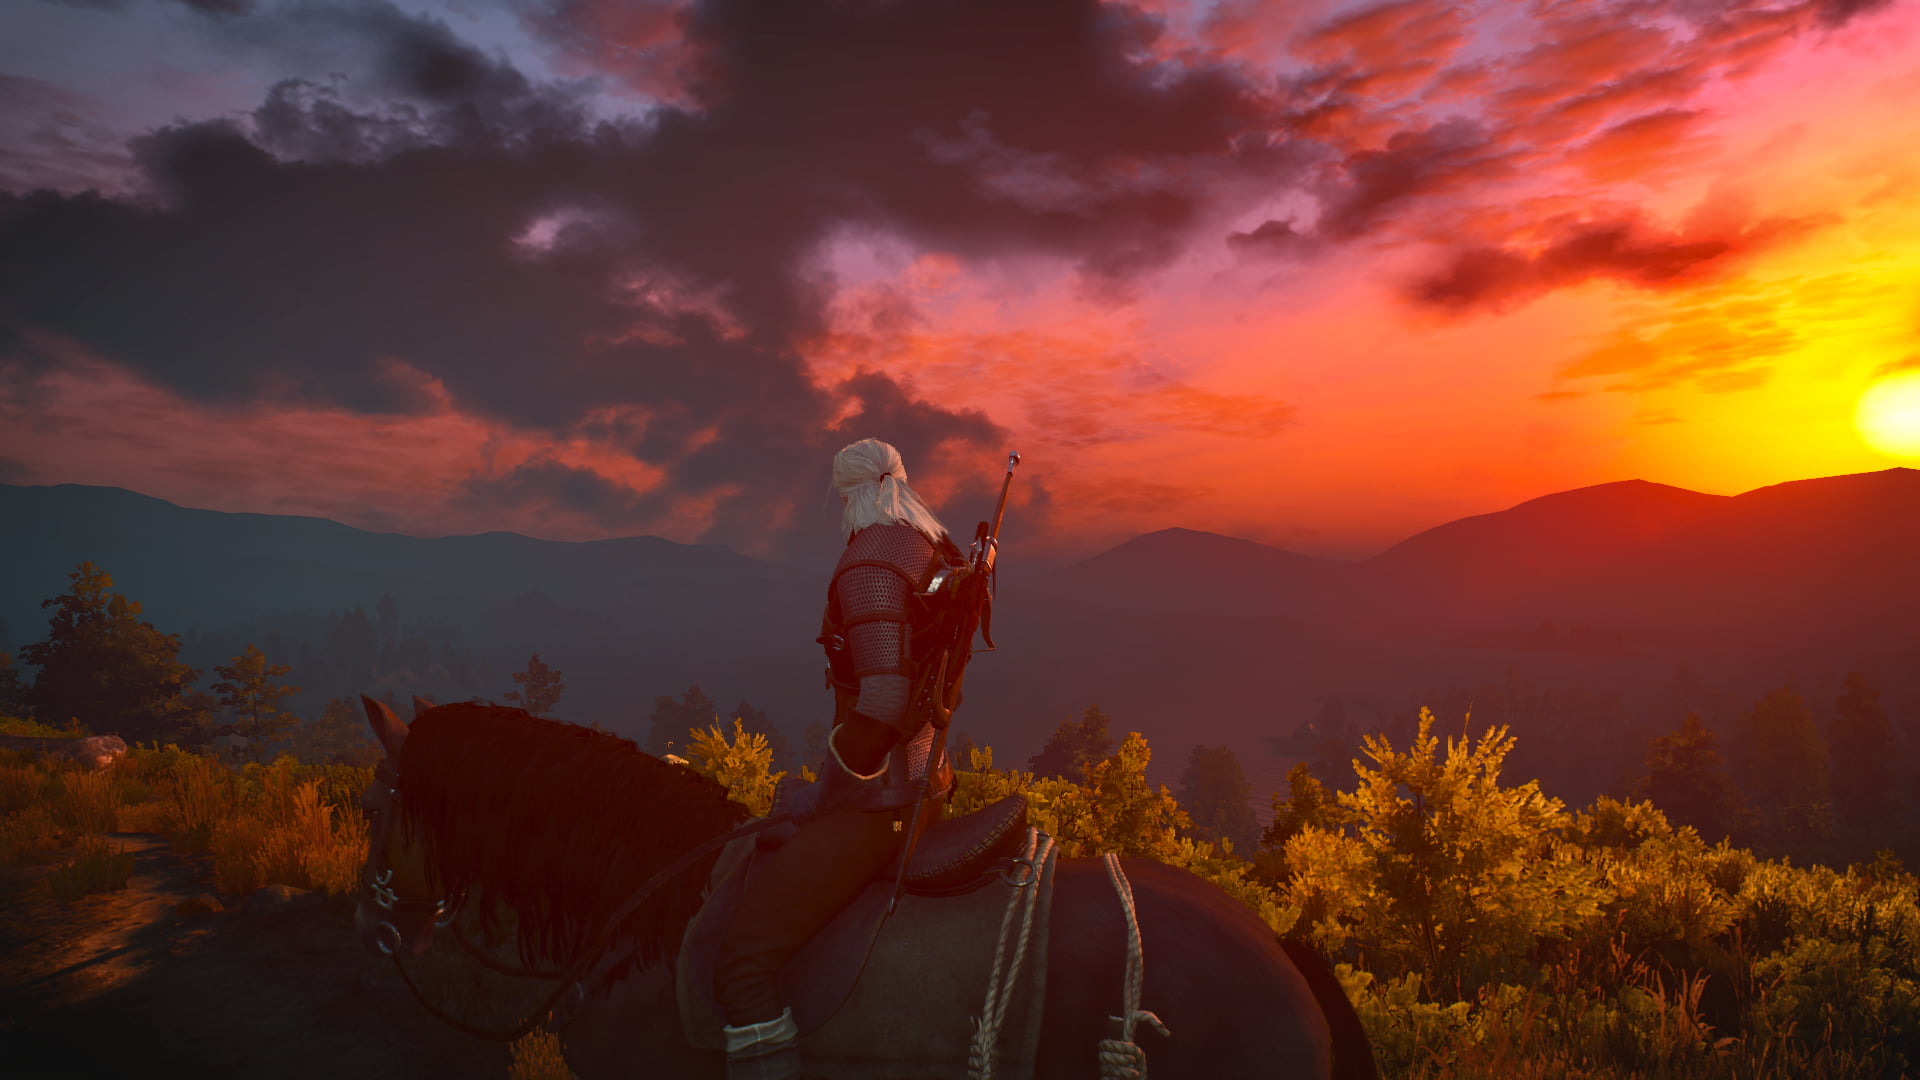 man riding on horse illustration, The Witcher, The Witcher 3: Wild Hunt, video games